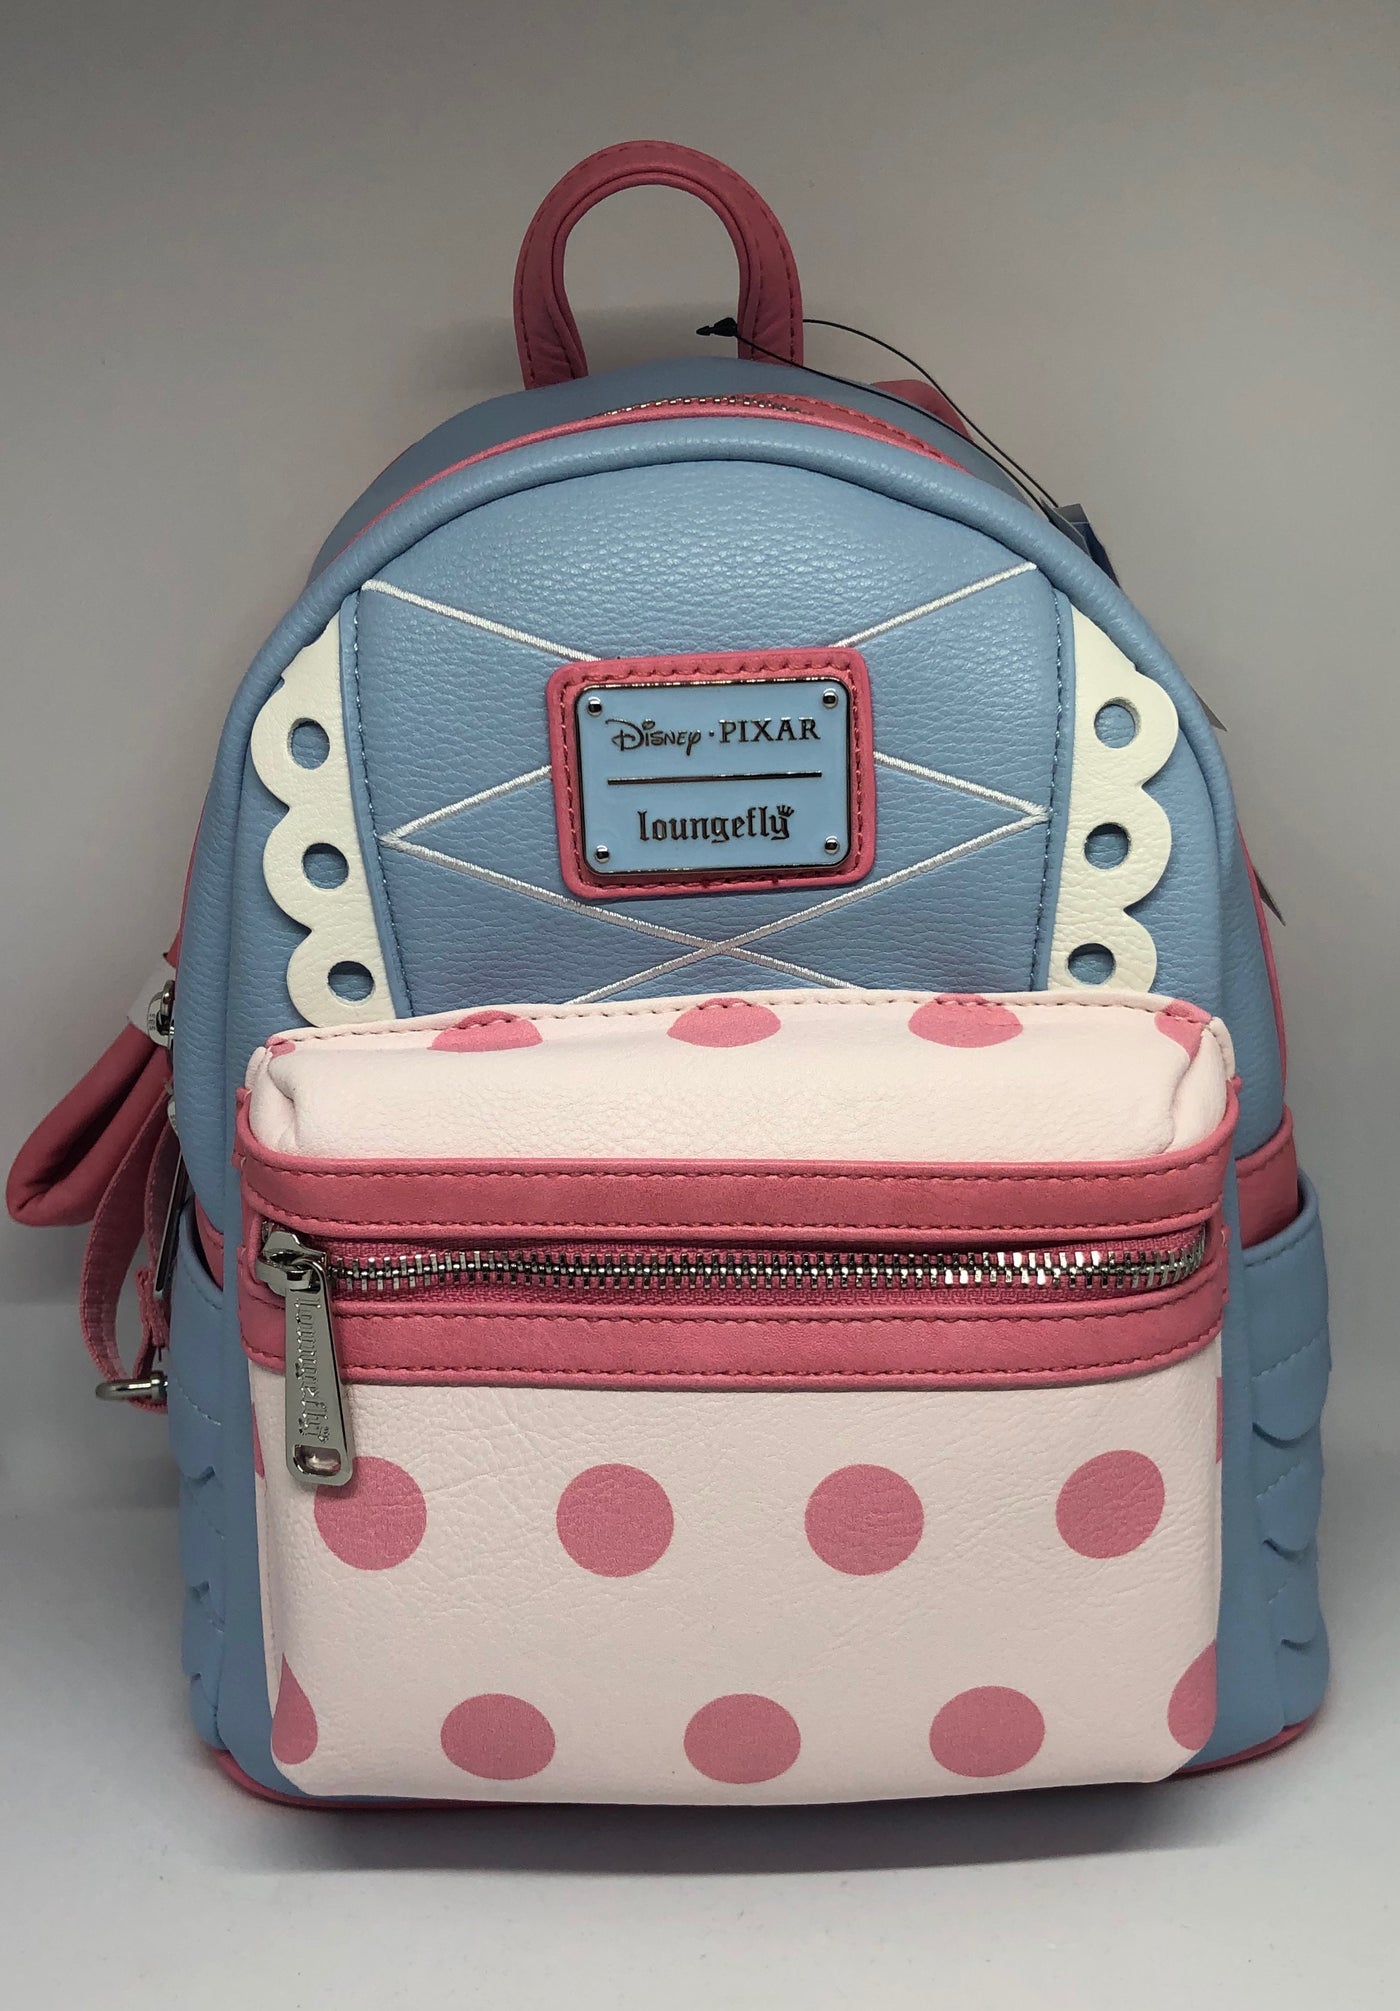 Disney Toy Story 4 Bo Peep Mini Backpack by Loungefly New with Tags